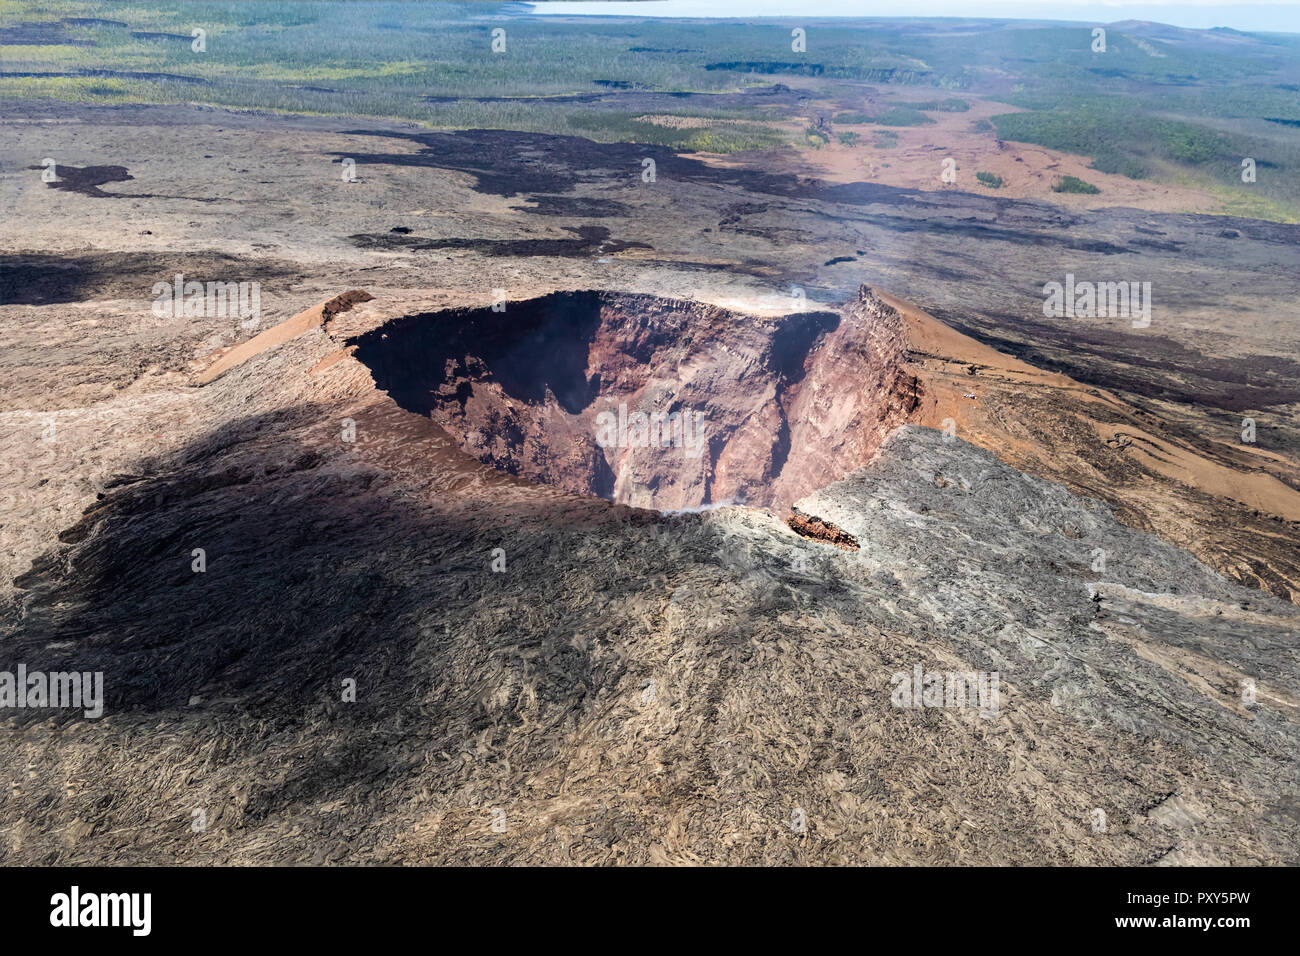 aerial view of Puu Ooo Volcanic cone on the Big Island of Hawaii. Volcanic gas can be seen escaping from the crater. Stock Photo